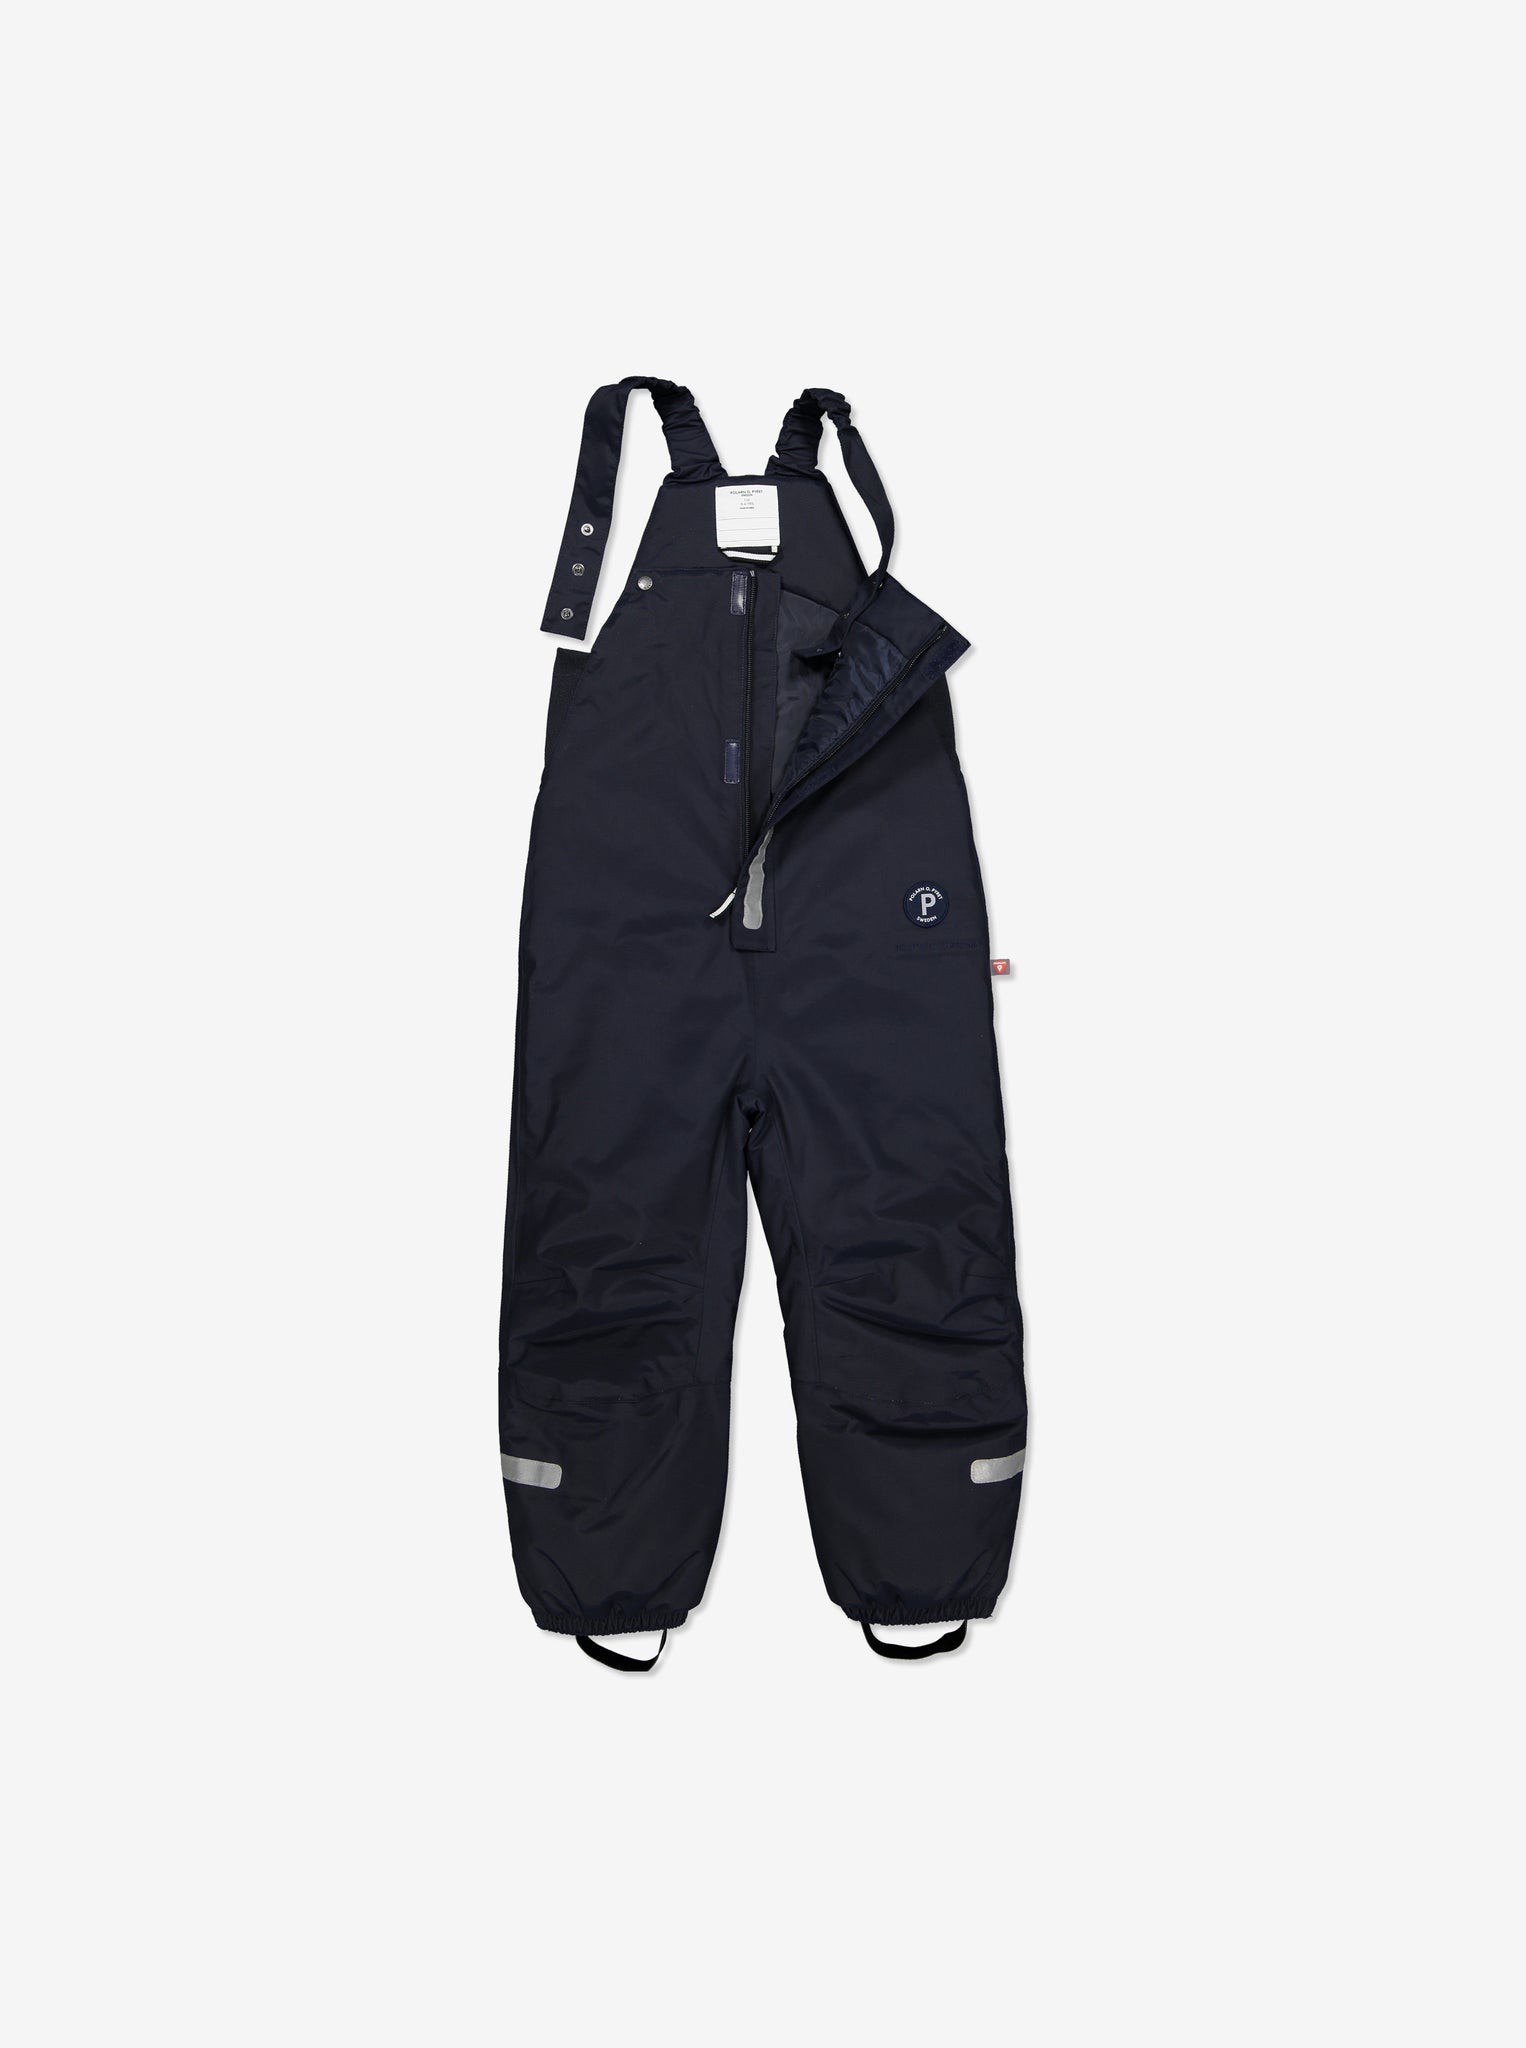 waterproof padded kids overall navy, elastic detachable braces with an anti slip function, durable comfortable and warm, quality polarn o. pyret 